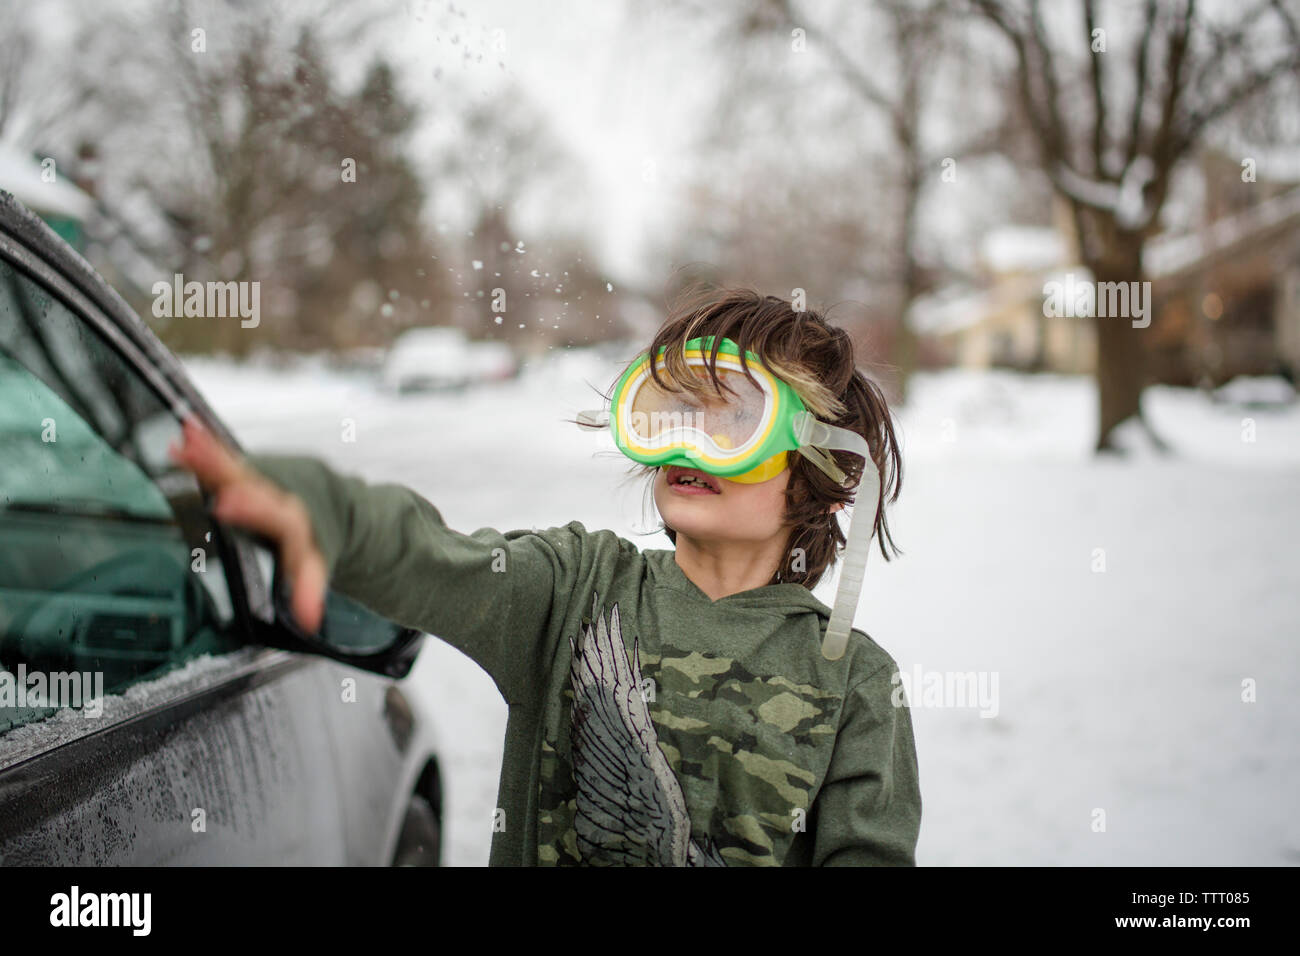 A small child wearing a snorkel mask plays in the snow on a winter day Stock Photo